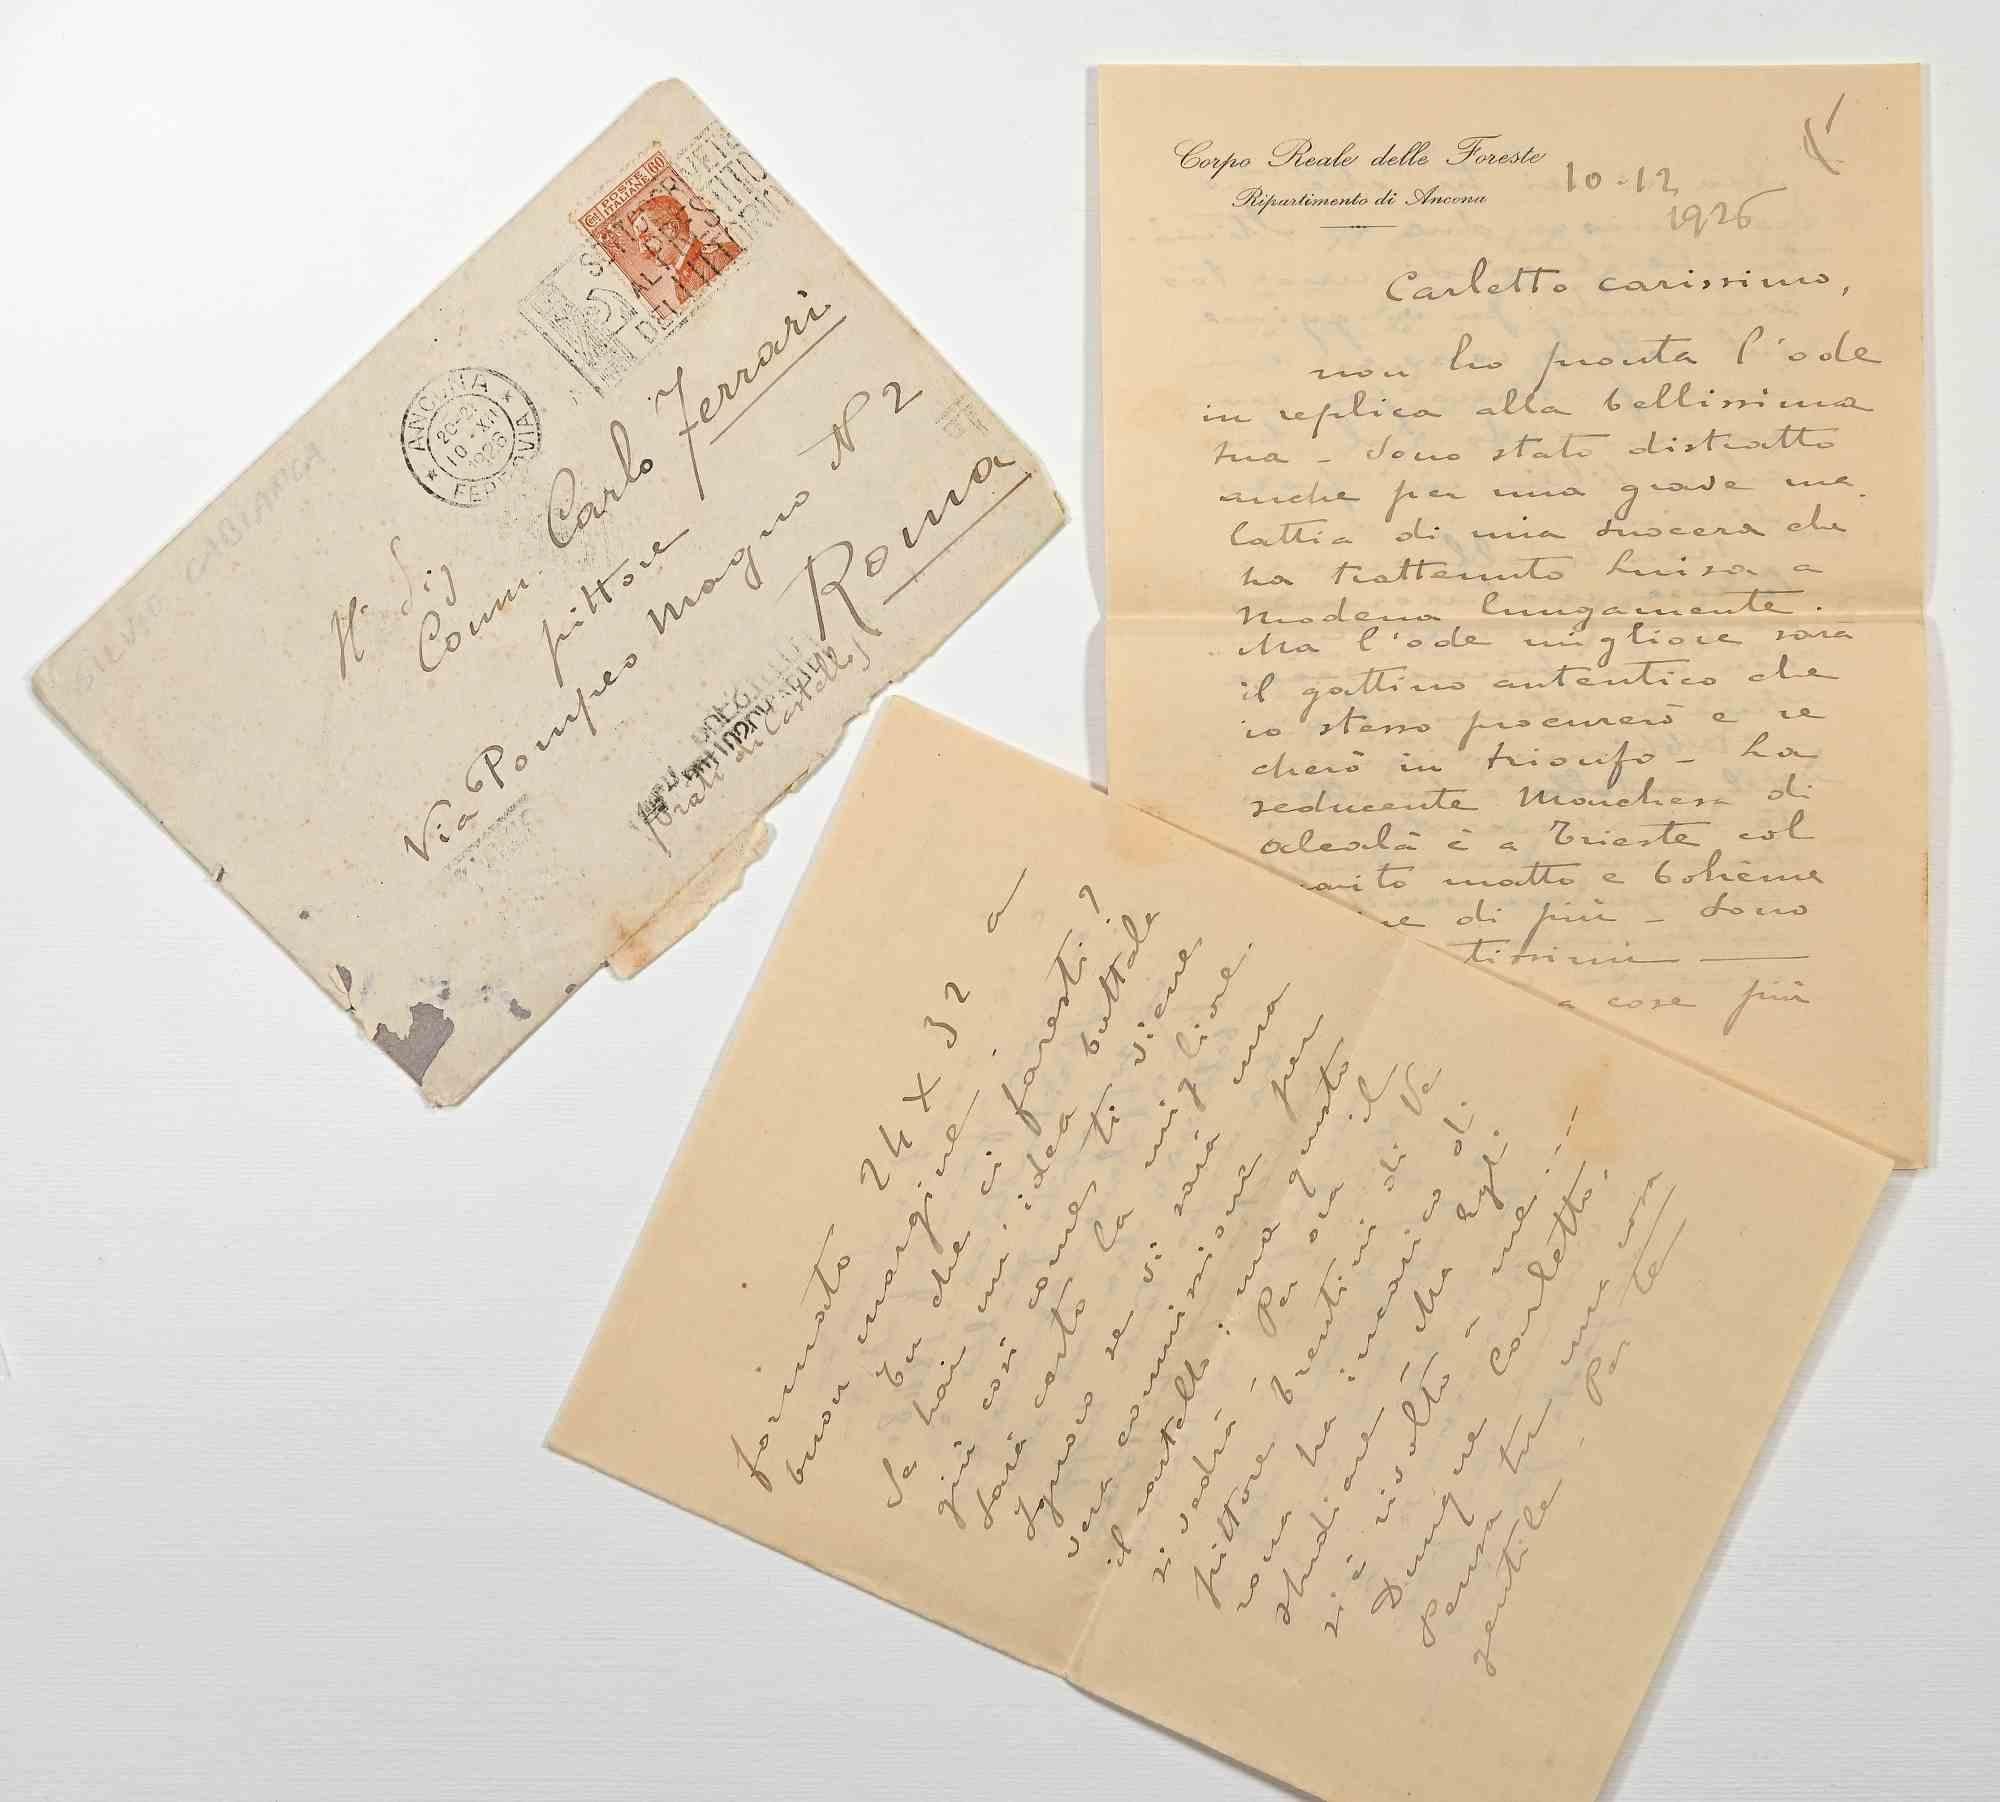 Authograph Letter Signed by Silvio Cabianca to the Artist Carlo Ferrari - 1926 For Sale 1